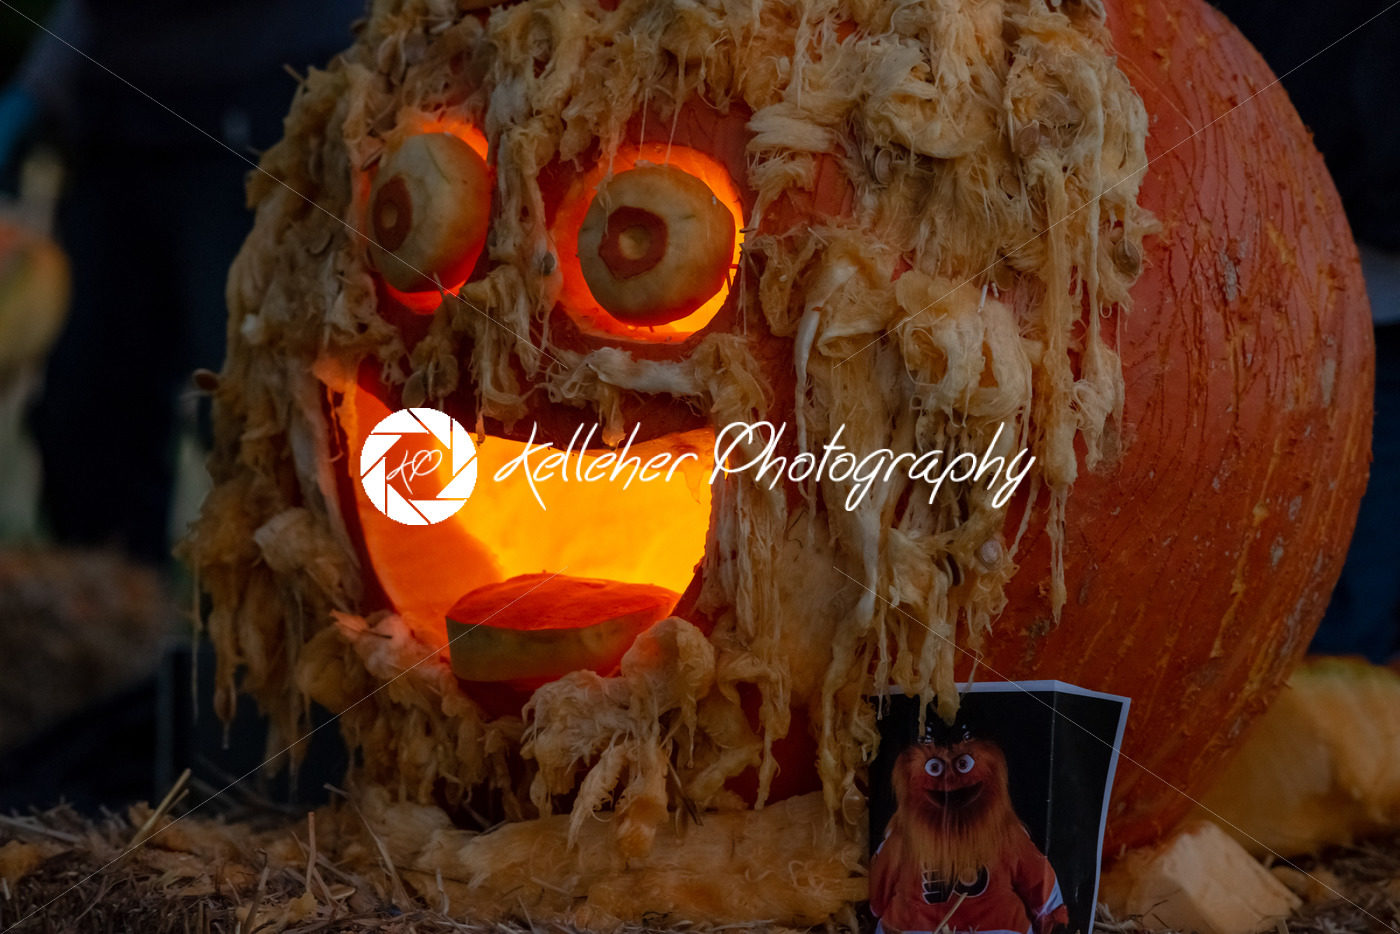 CHADDS FORD, PA – OCTOBER 18: Gritty the new Philadelphia Flyer’s mascot at The Great Pumpkin Carve carving contest on October 18, 2018 - Kelleher Photography Store